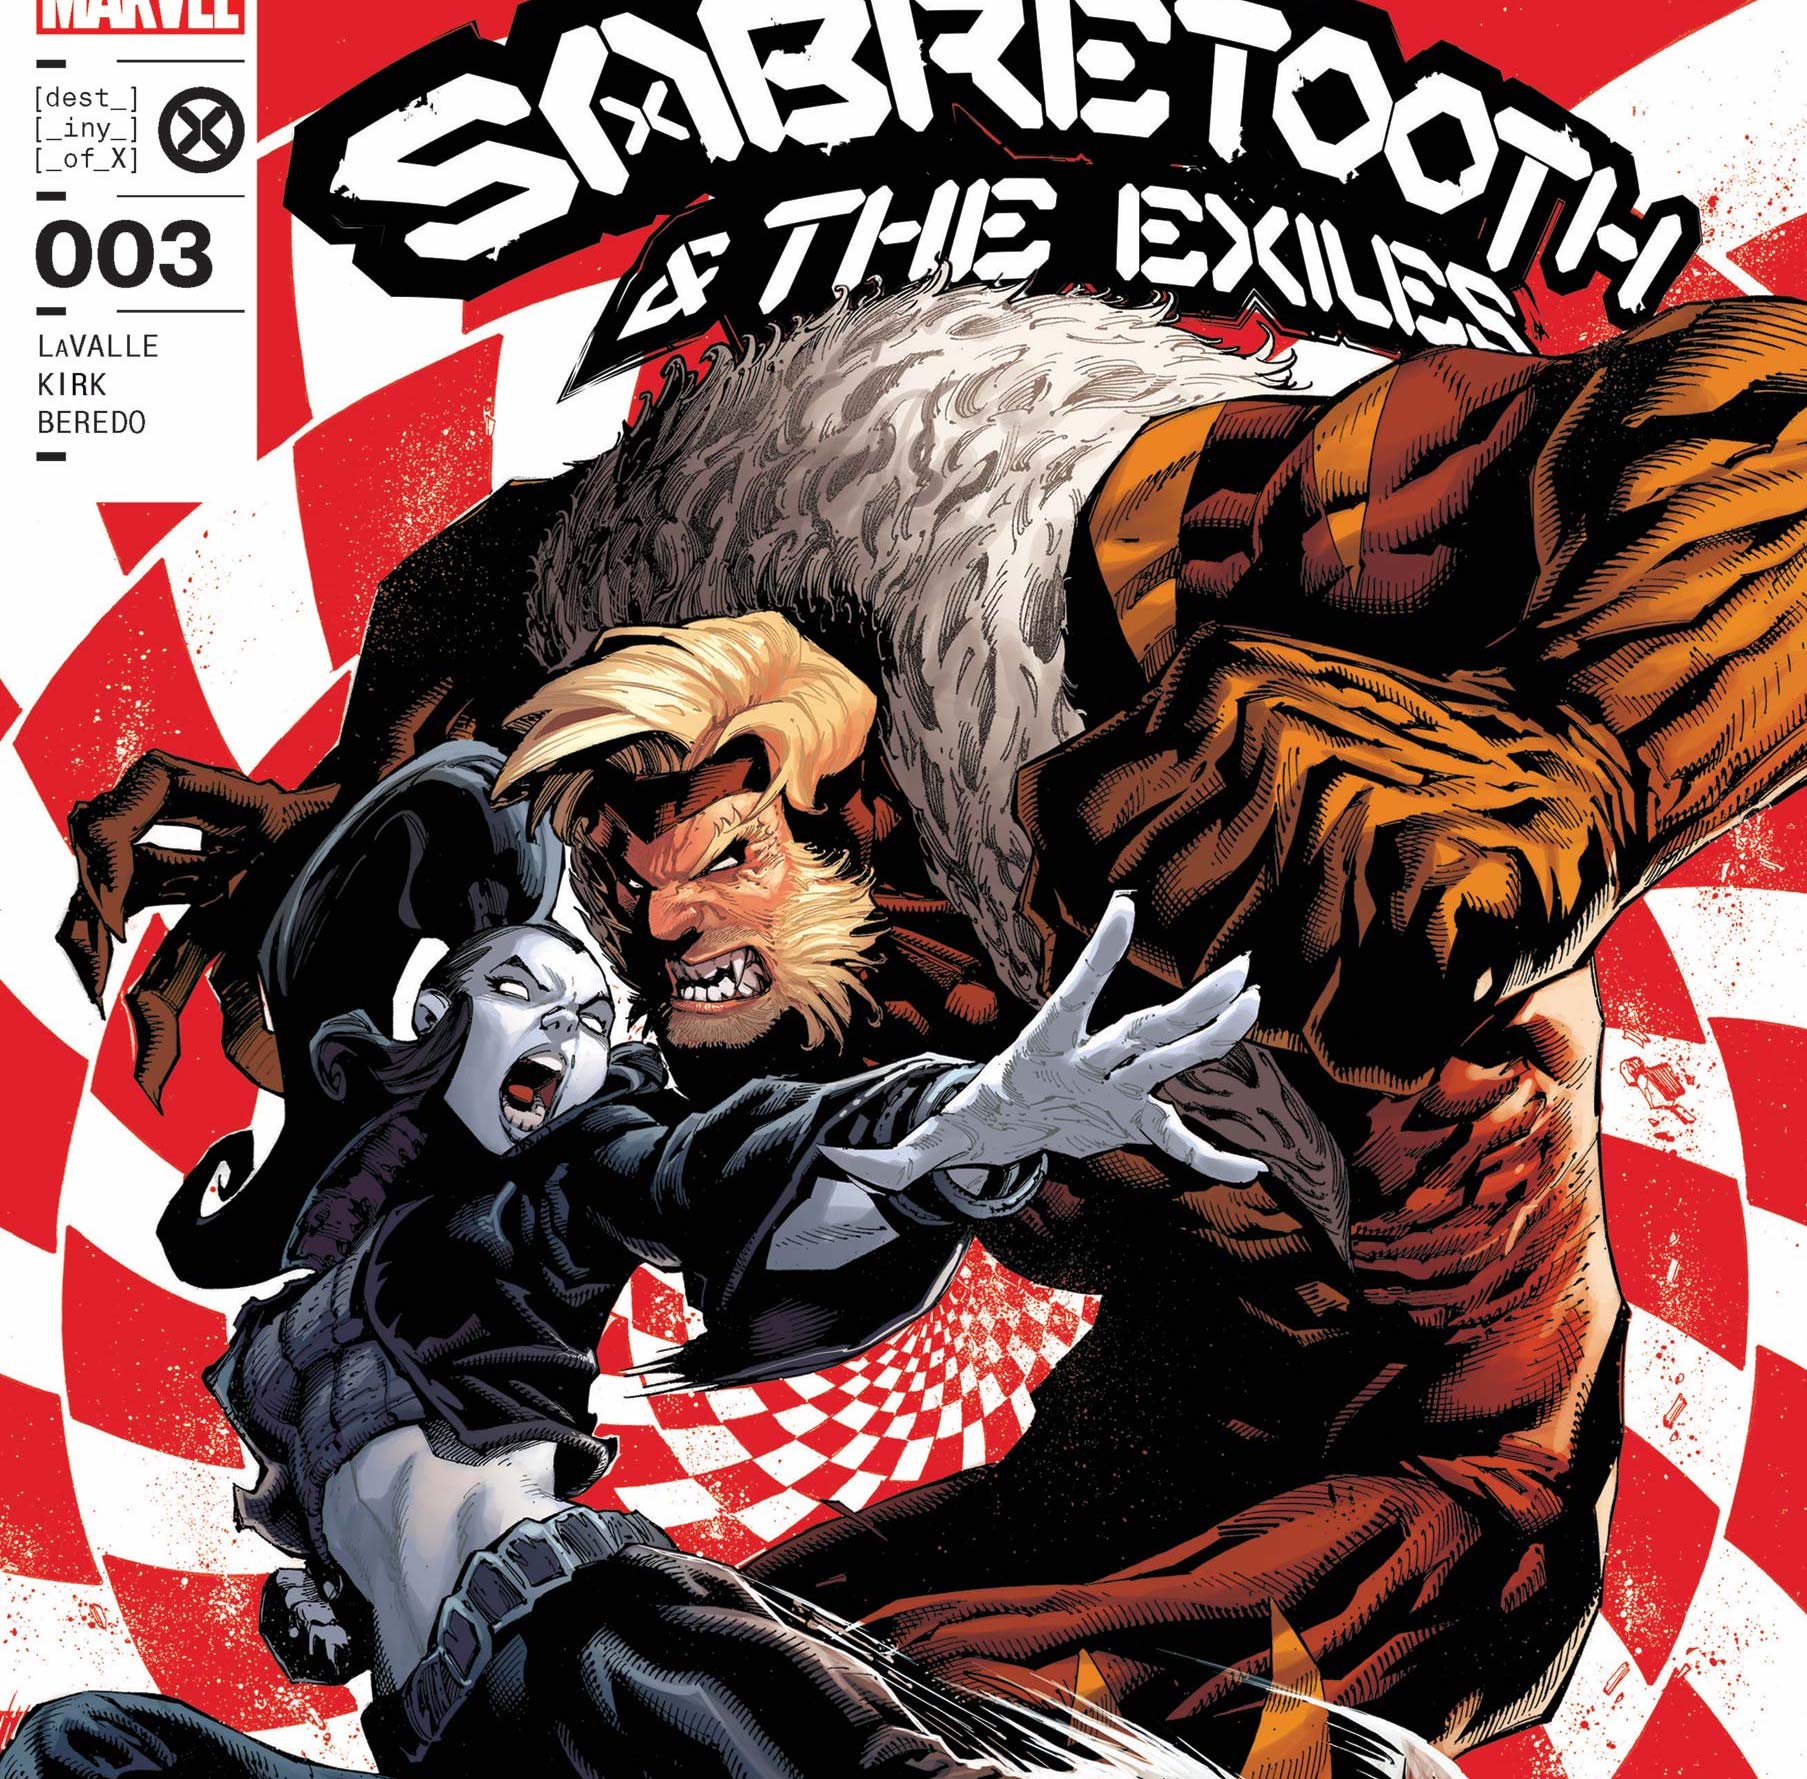 'Sabretooth & the Exiles' #3 is as entertaining as it is weird